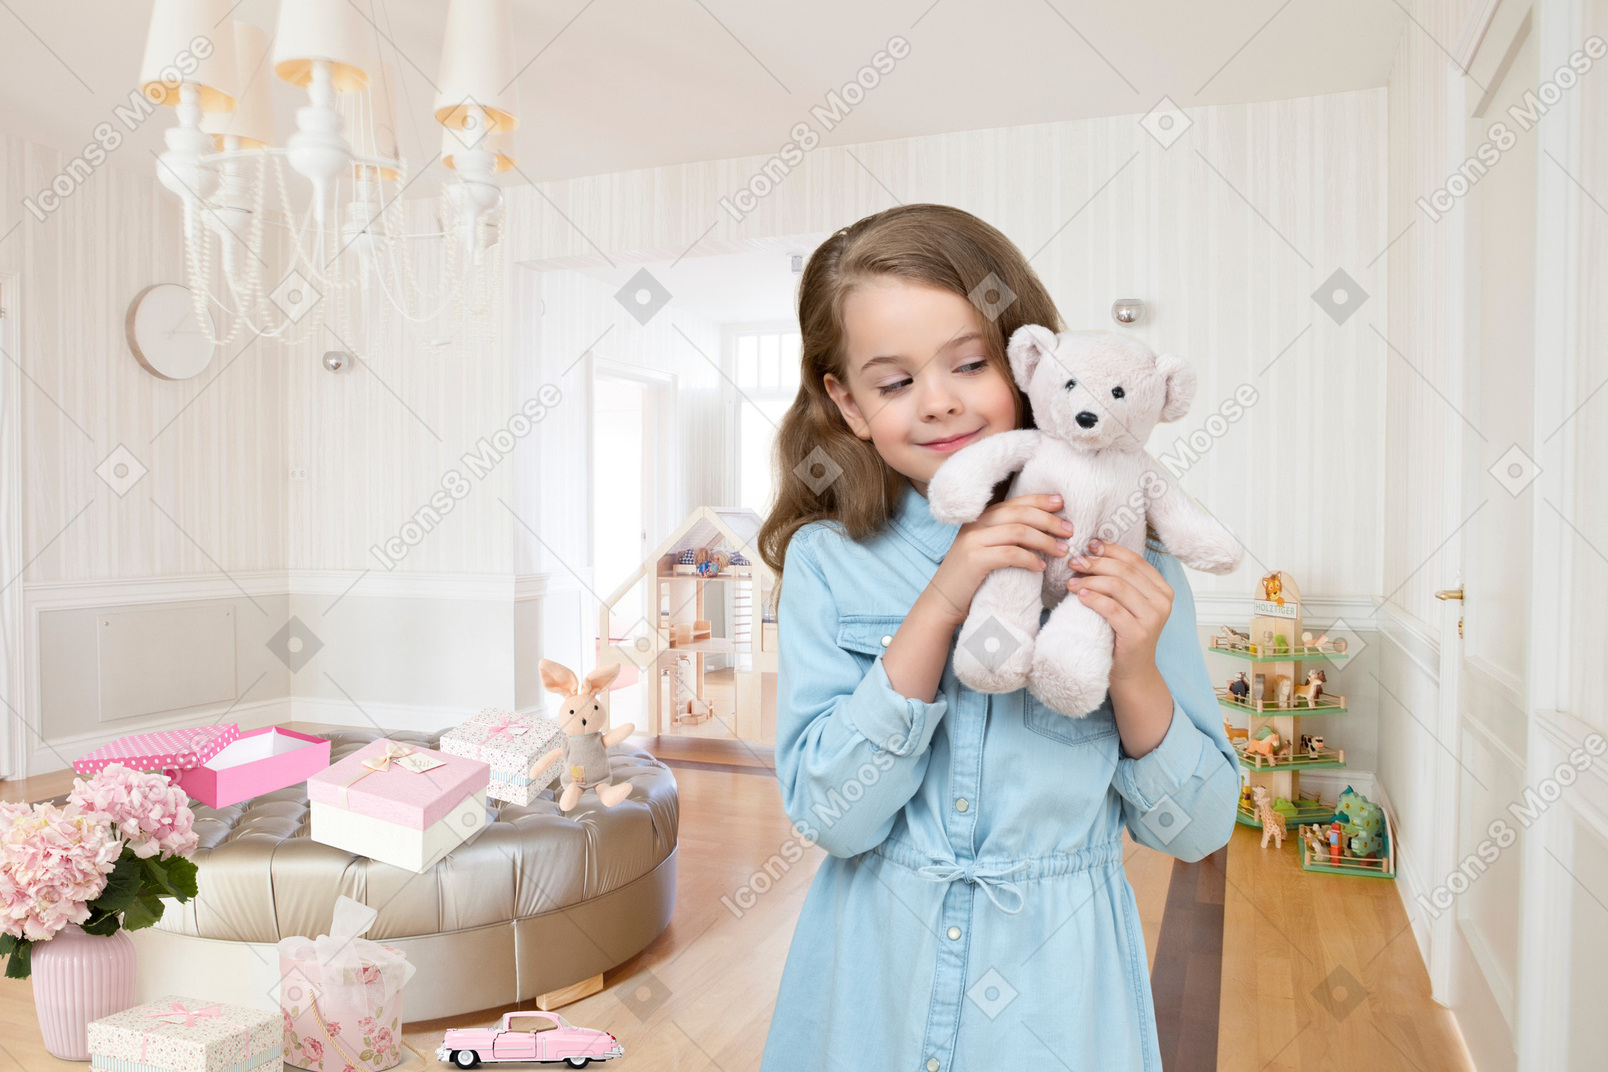 A little girl holding a teddy bear in her hands